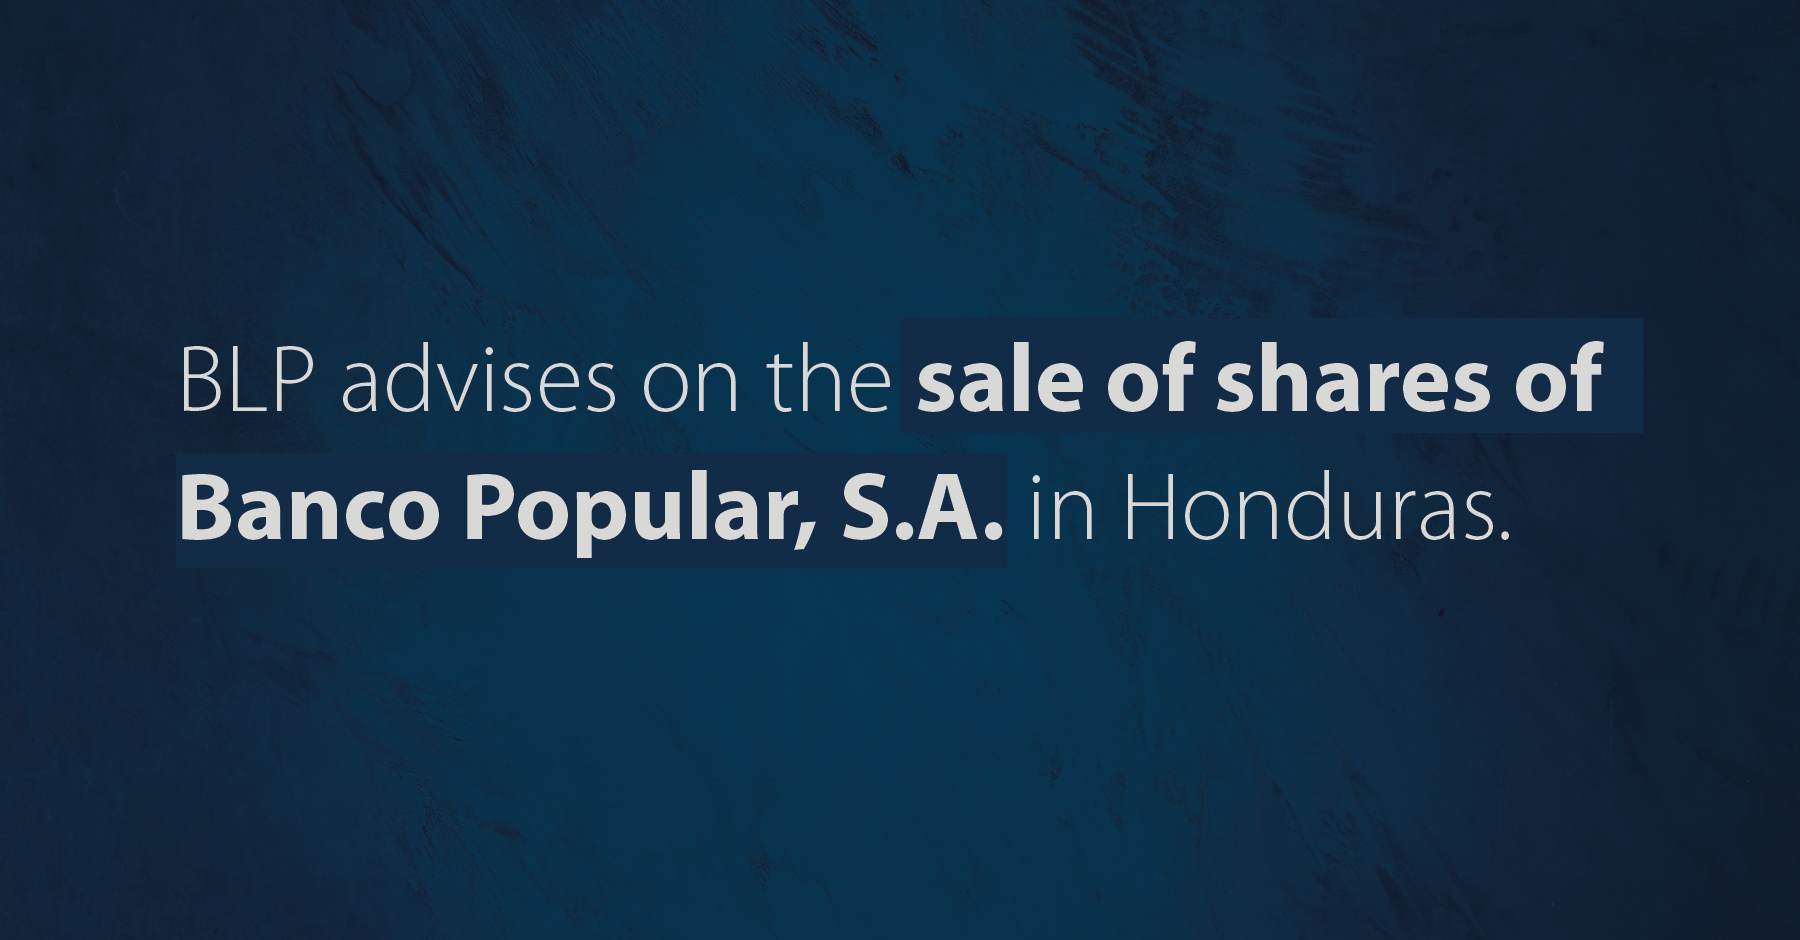 BLP advises on the sale of shares of Banco Popular, S.A. in Honduras